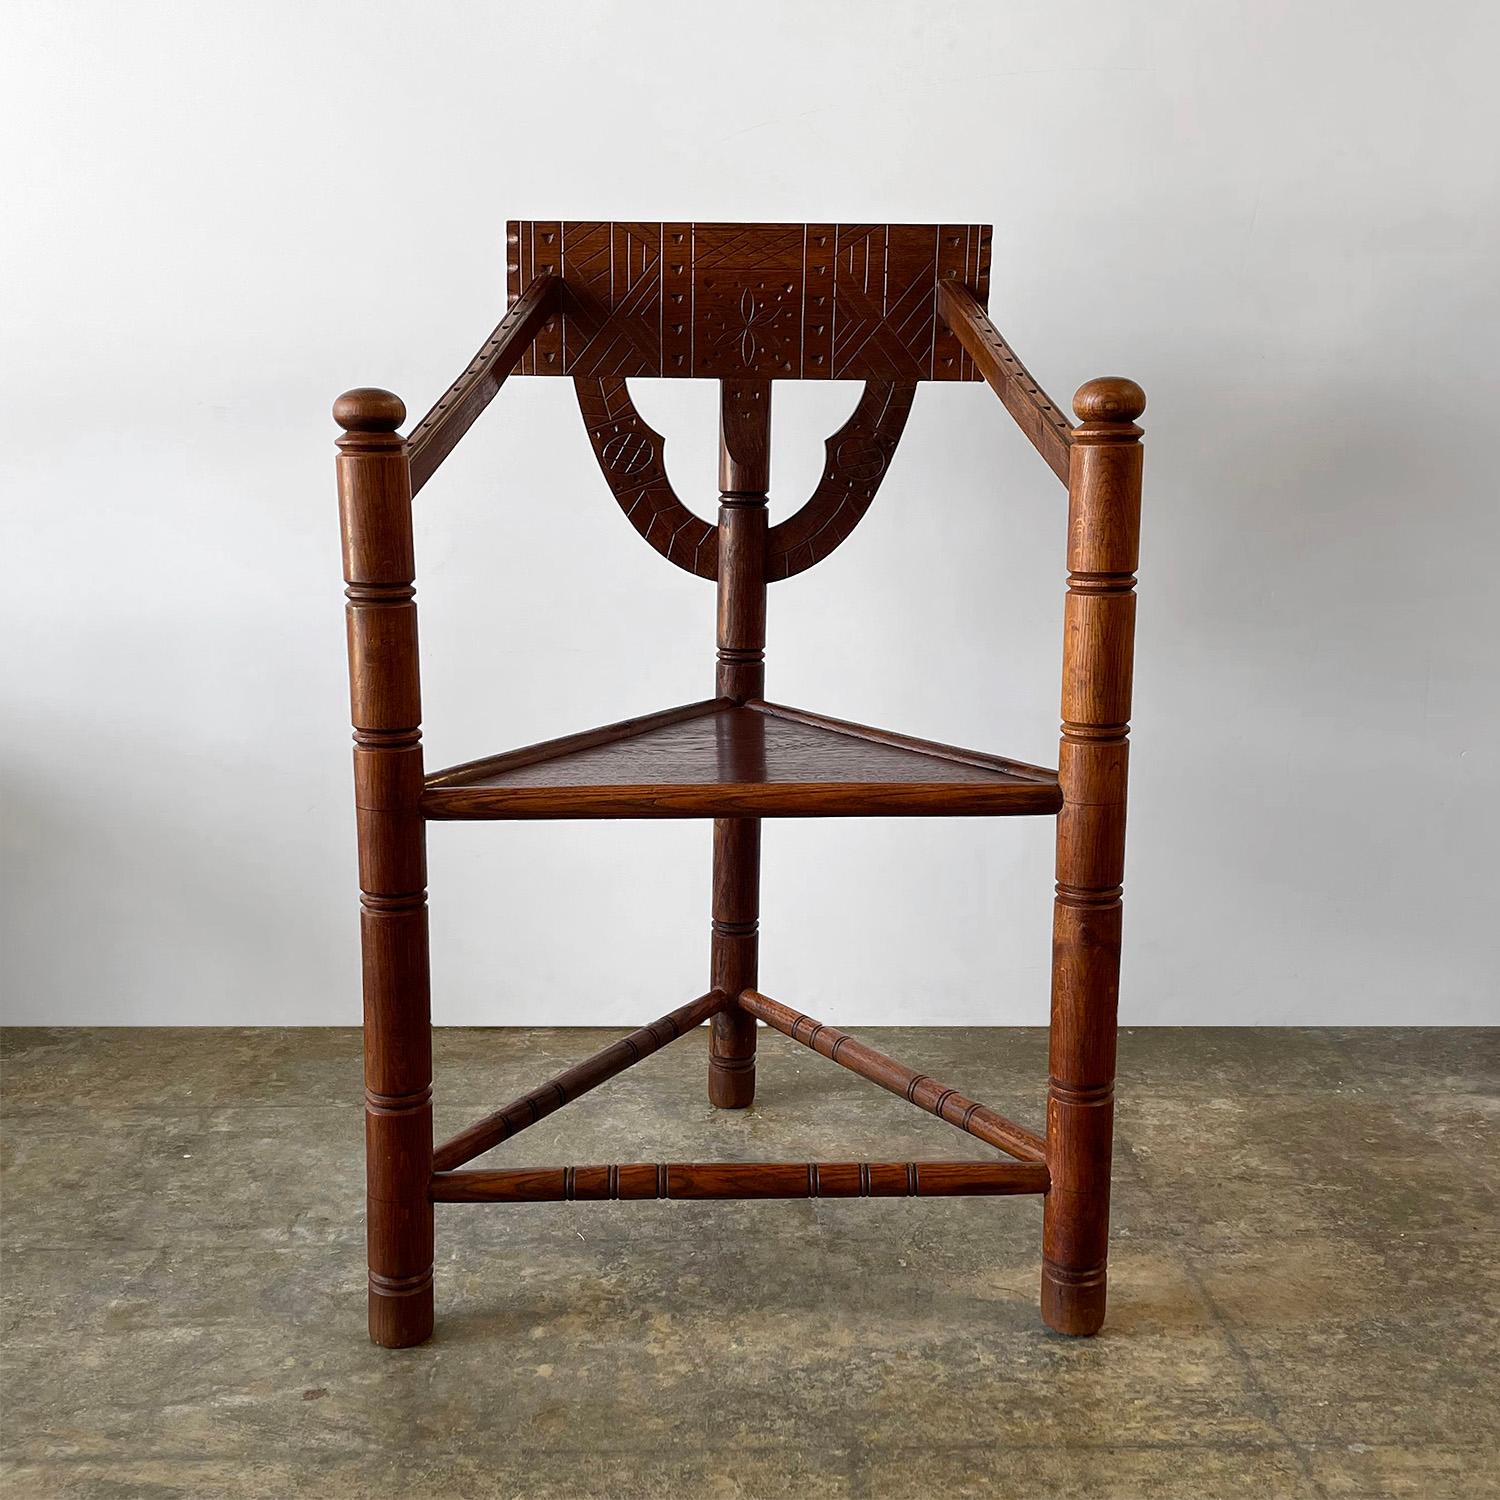 Swedish primitive monk chair
Sweden, early 20th century
Each chair is unique in its composition and design
Made of solid oak and with intricately carved patterns and markings
Patina from age and use
Newly reconditioned
Hand crafted piece,